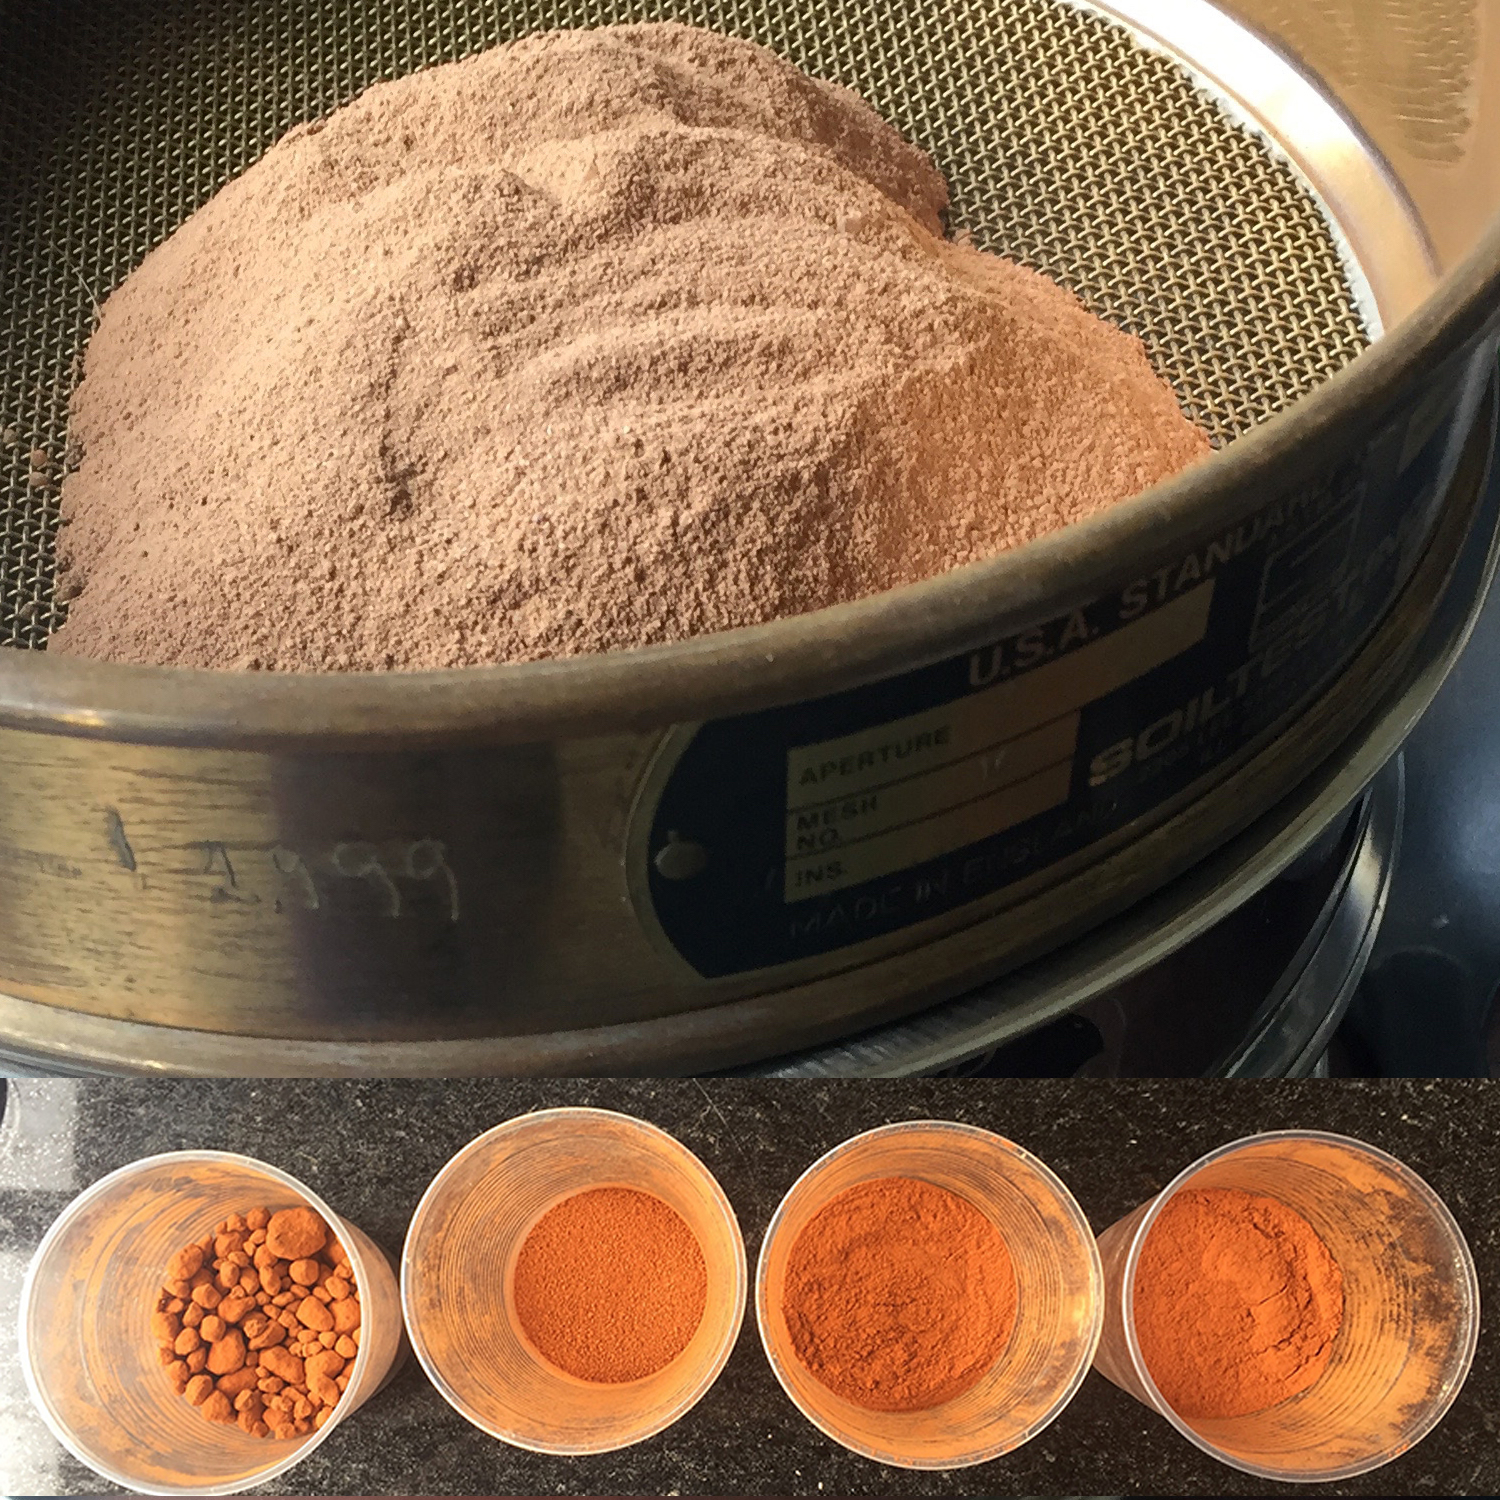  Pigments are sieved into different particle sizes